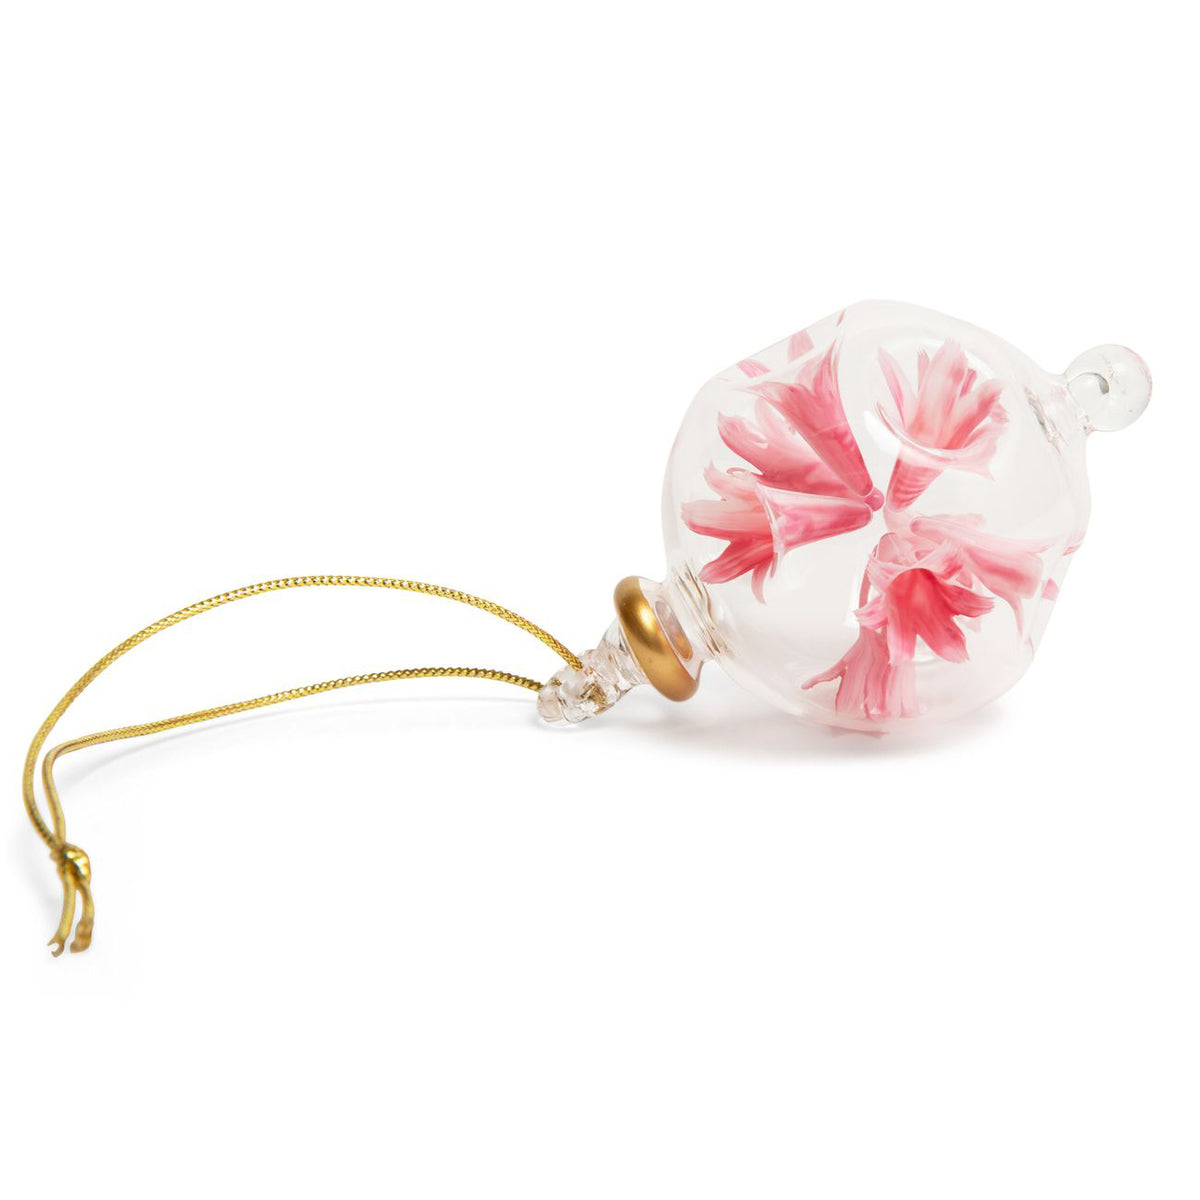 Blown Glass Ornament - Pink Blossoms